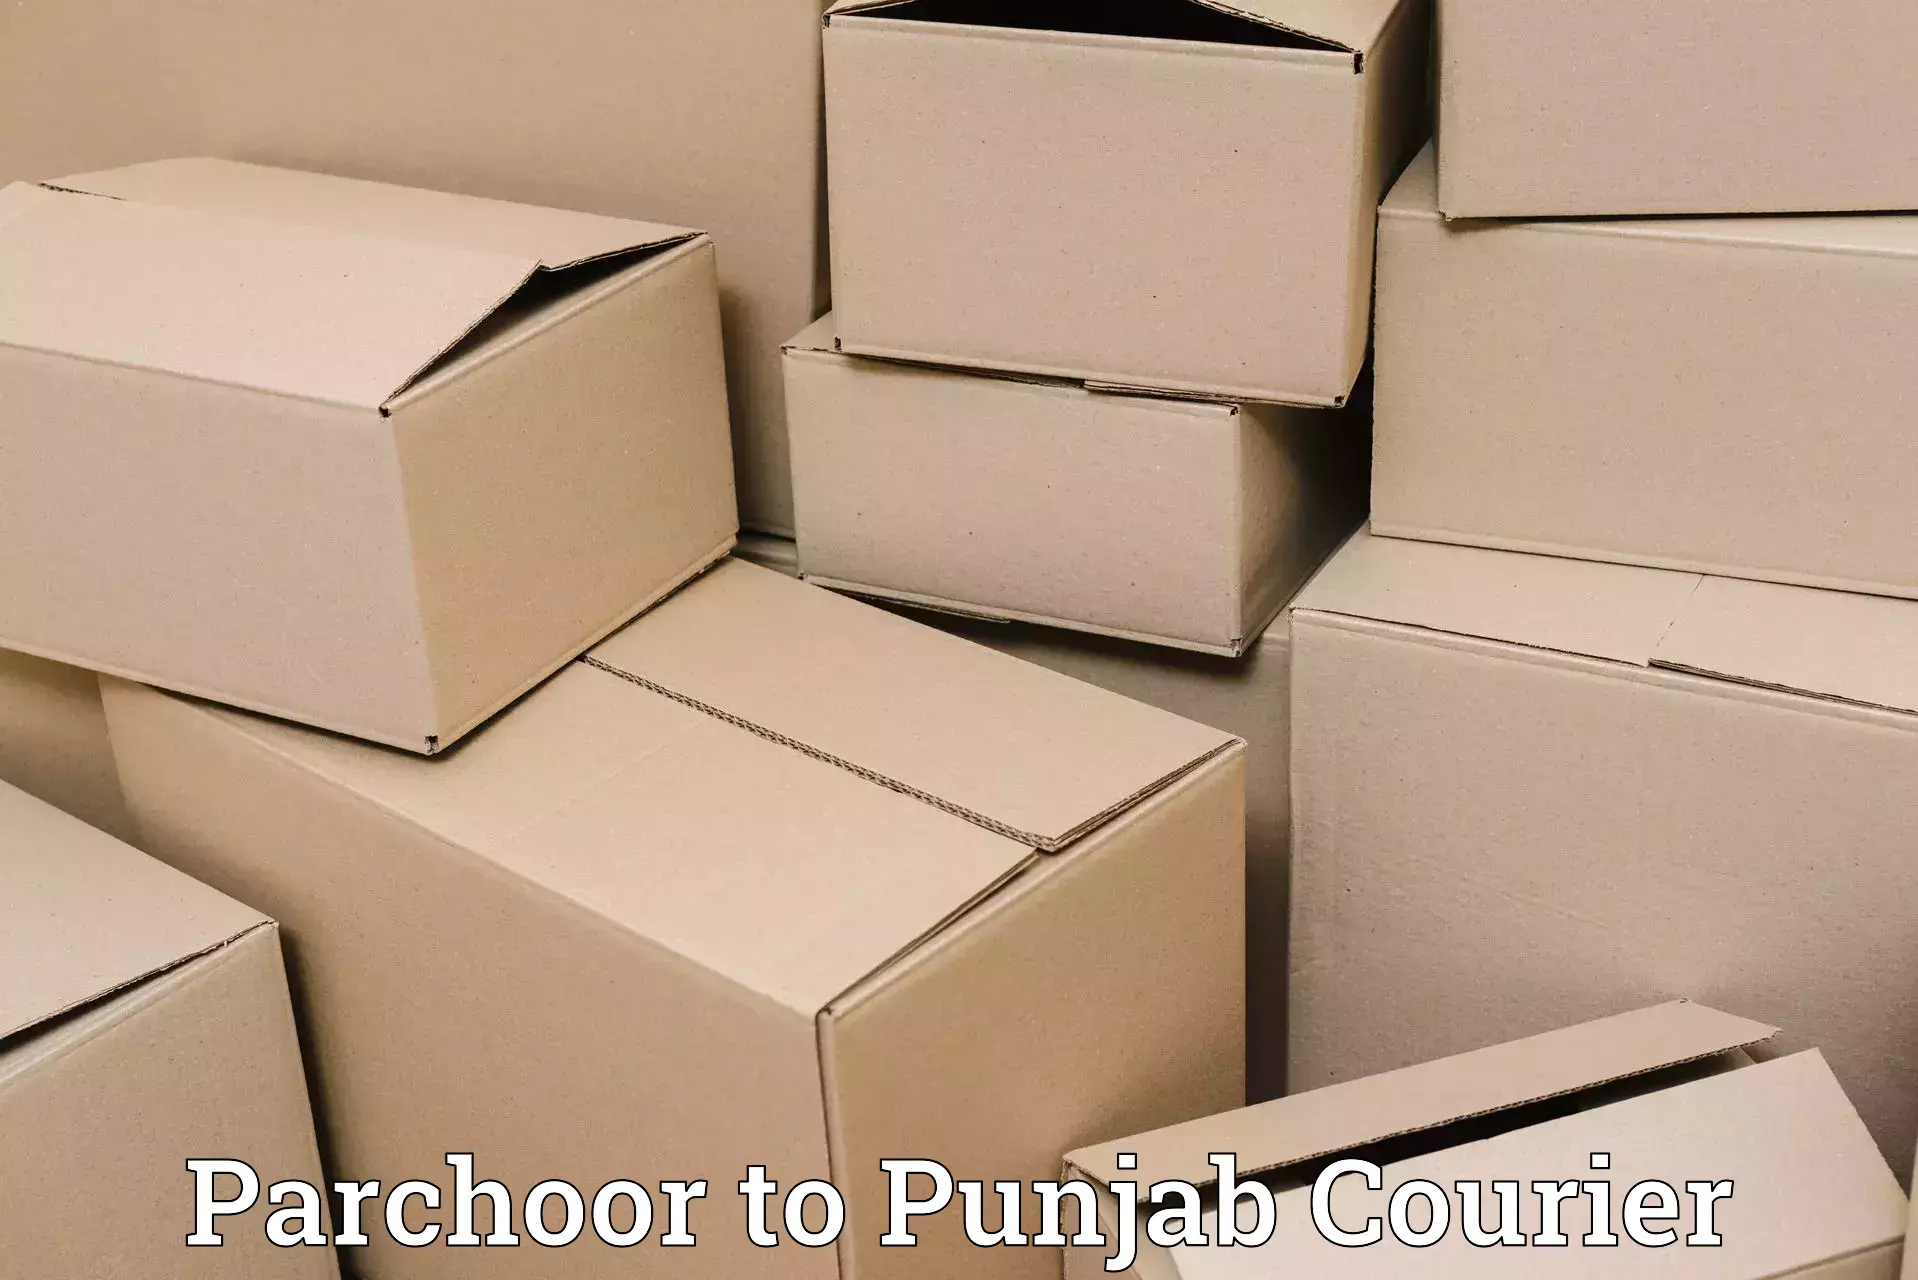 Large package courier Parchoor to Gurdaspur